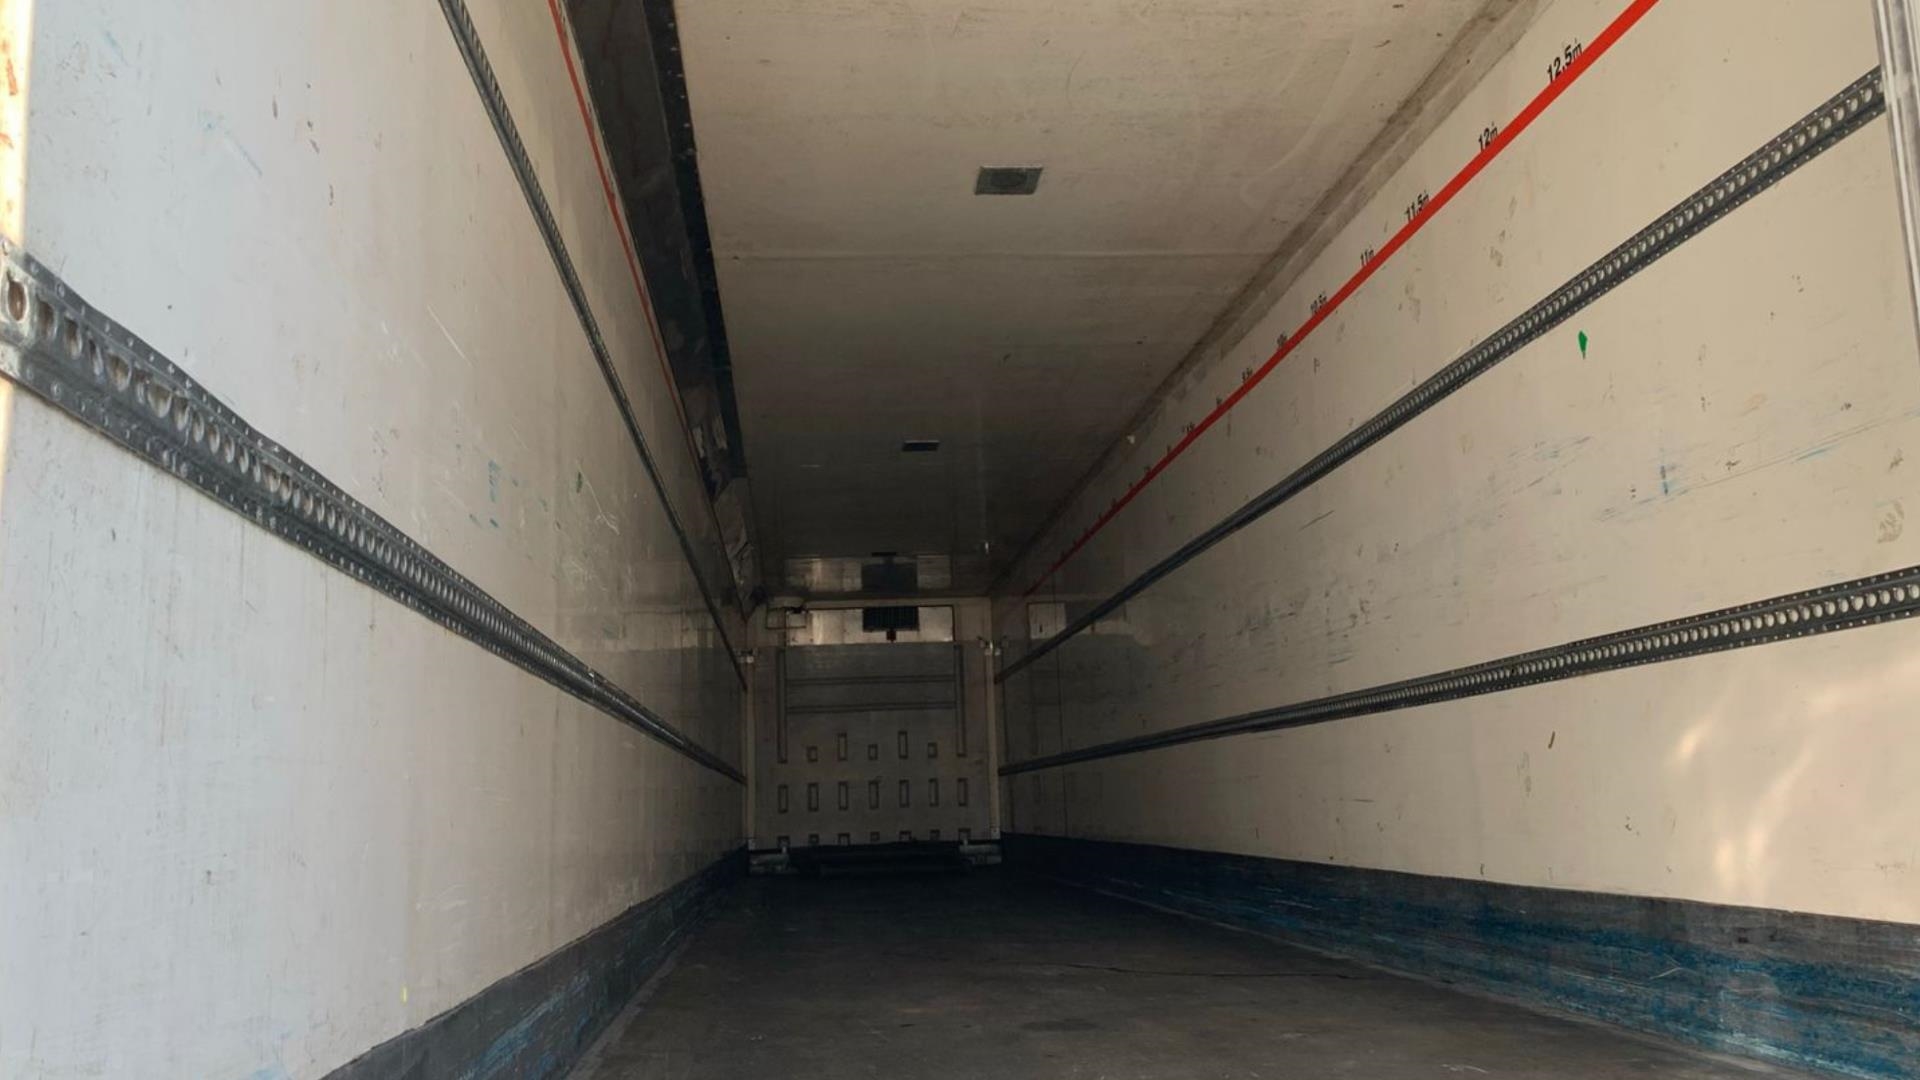 Serco Trailers 2014 Serco Fridge Trailer for Sale 2014 for sale by Truck and Plant Connection | Truck & Trailer Marketplaces